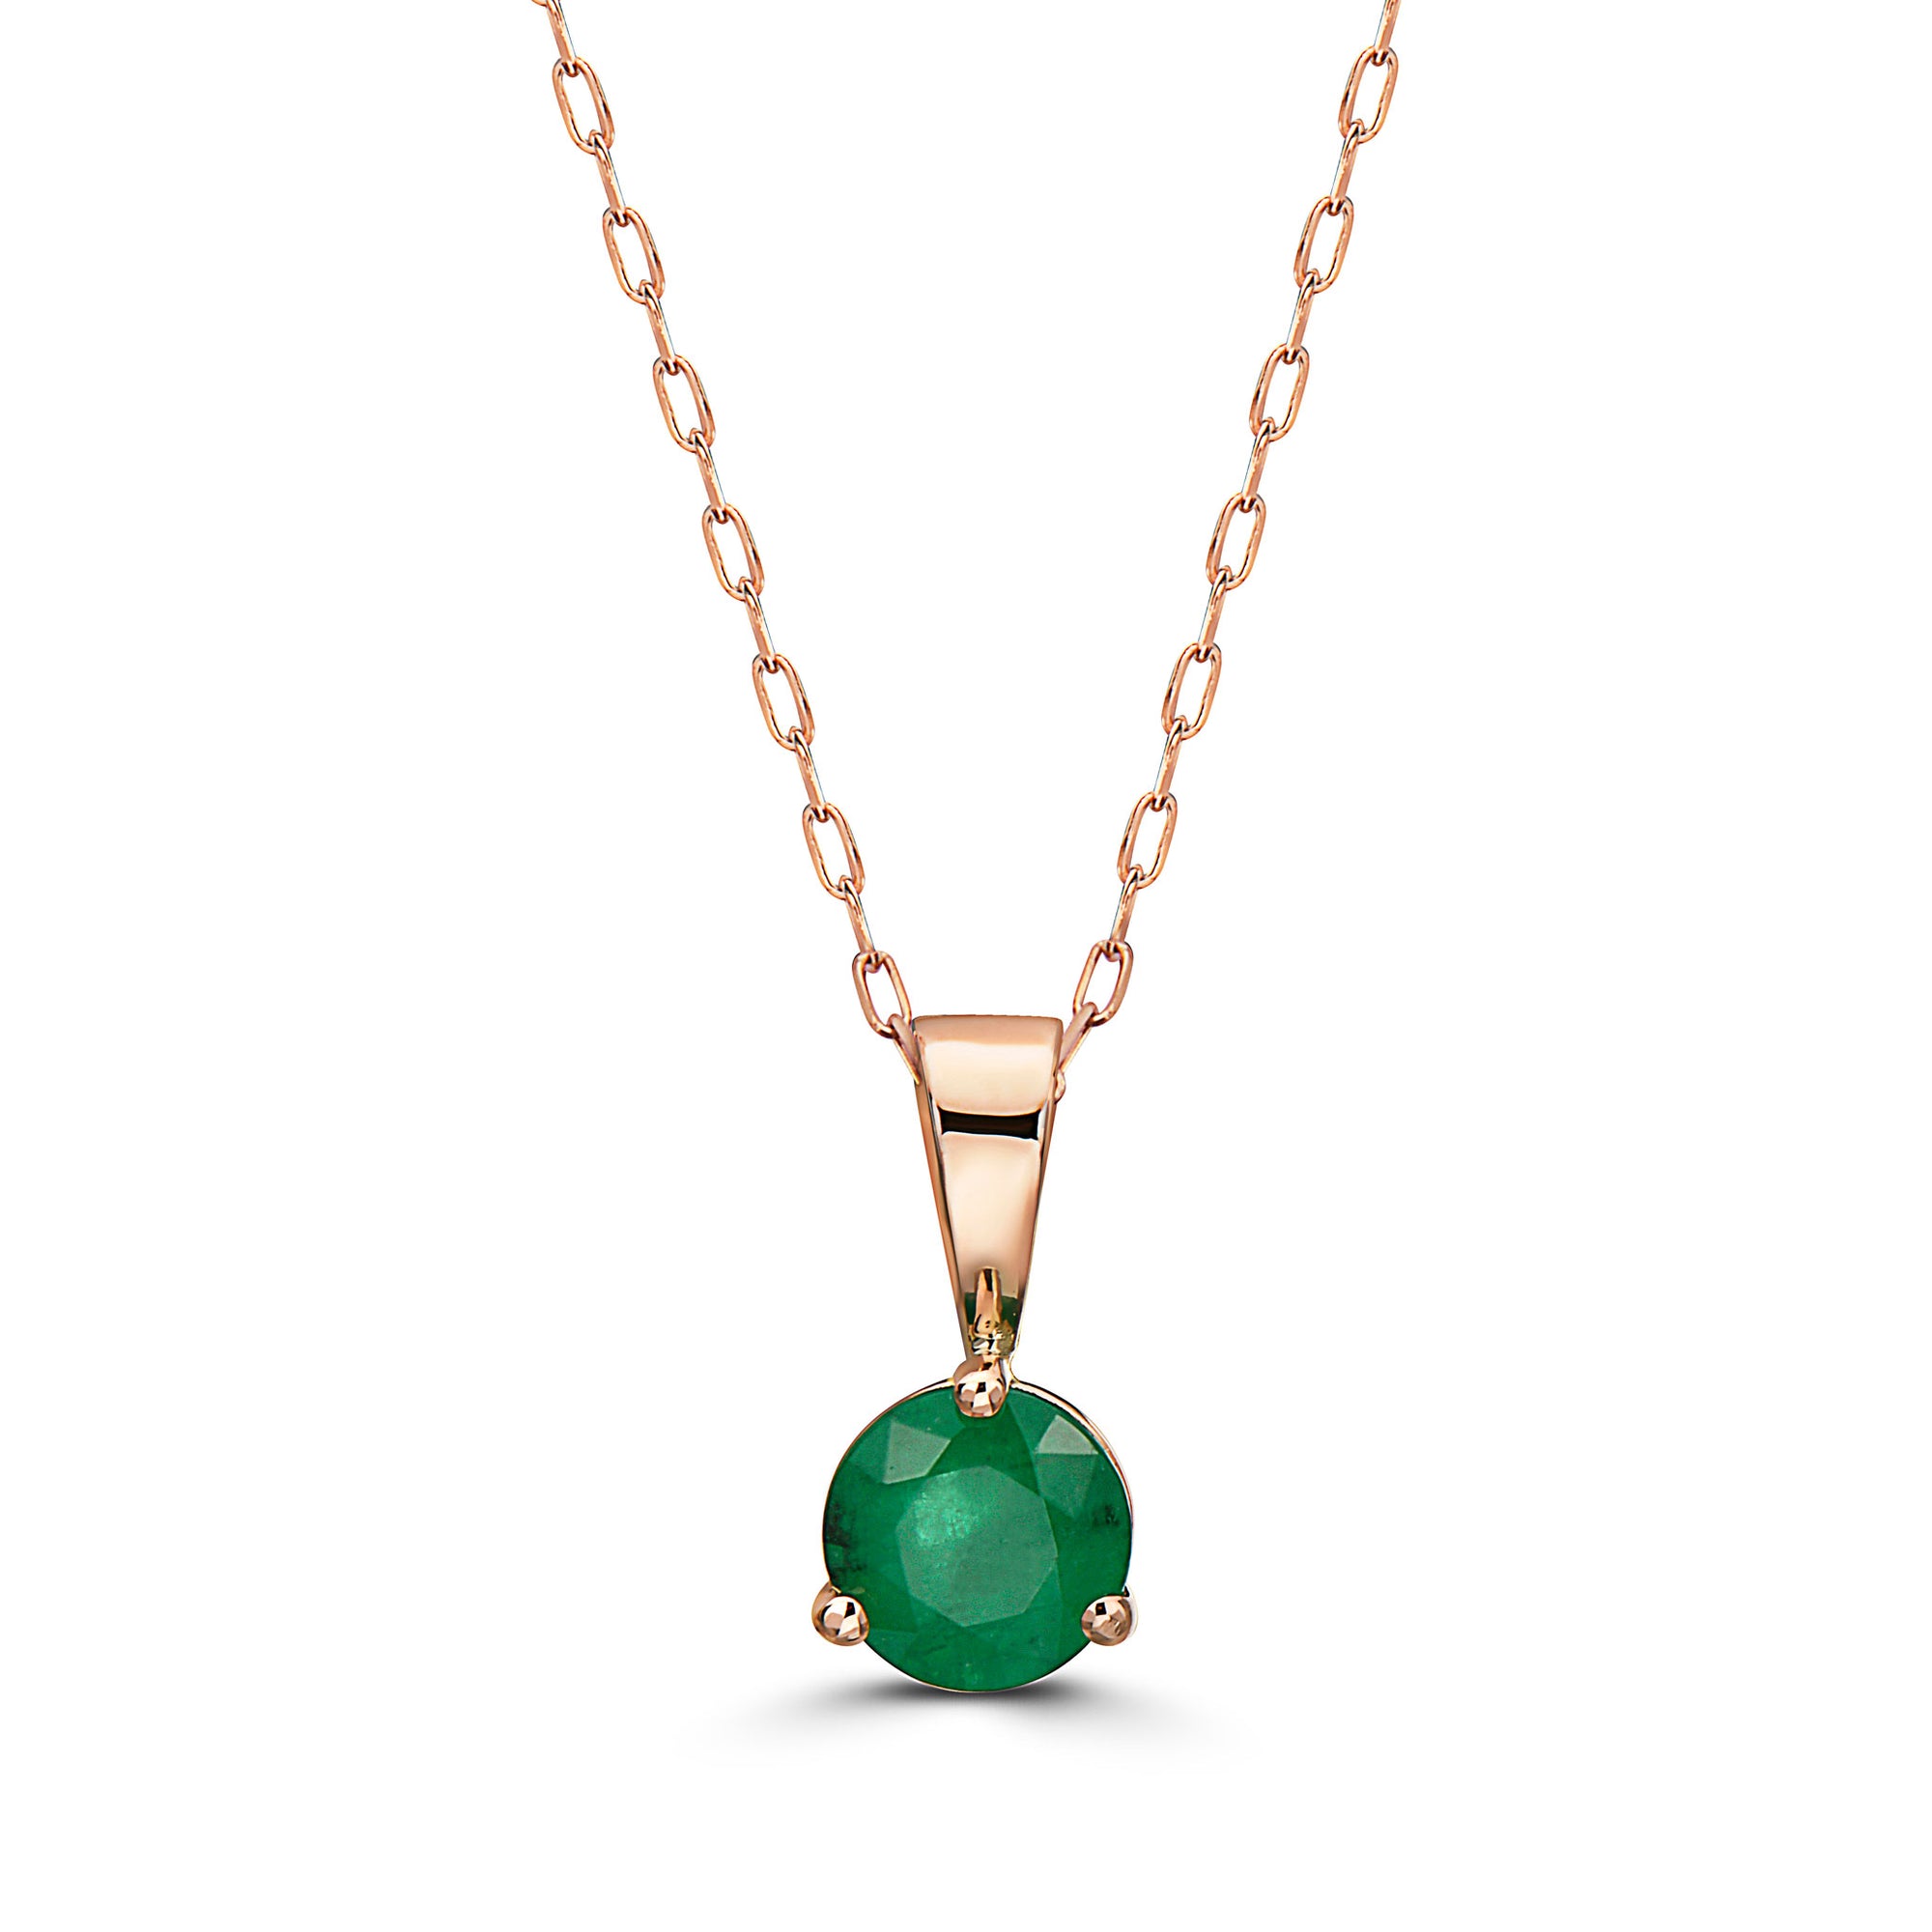 Birthstone Pendant 1/2 cts Beautiful Natural Green Emerald, set in 14K Rose Gold